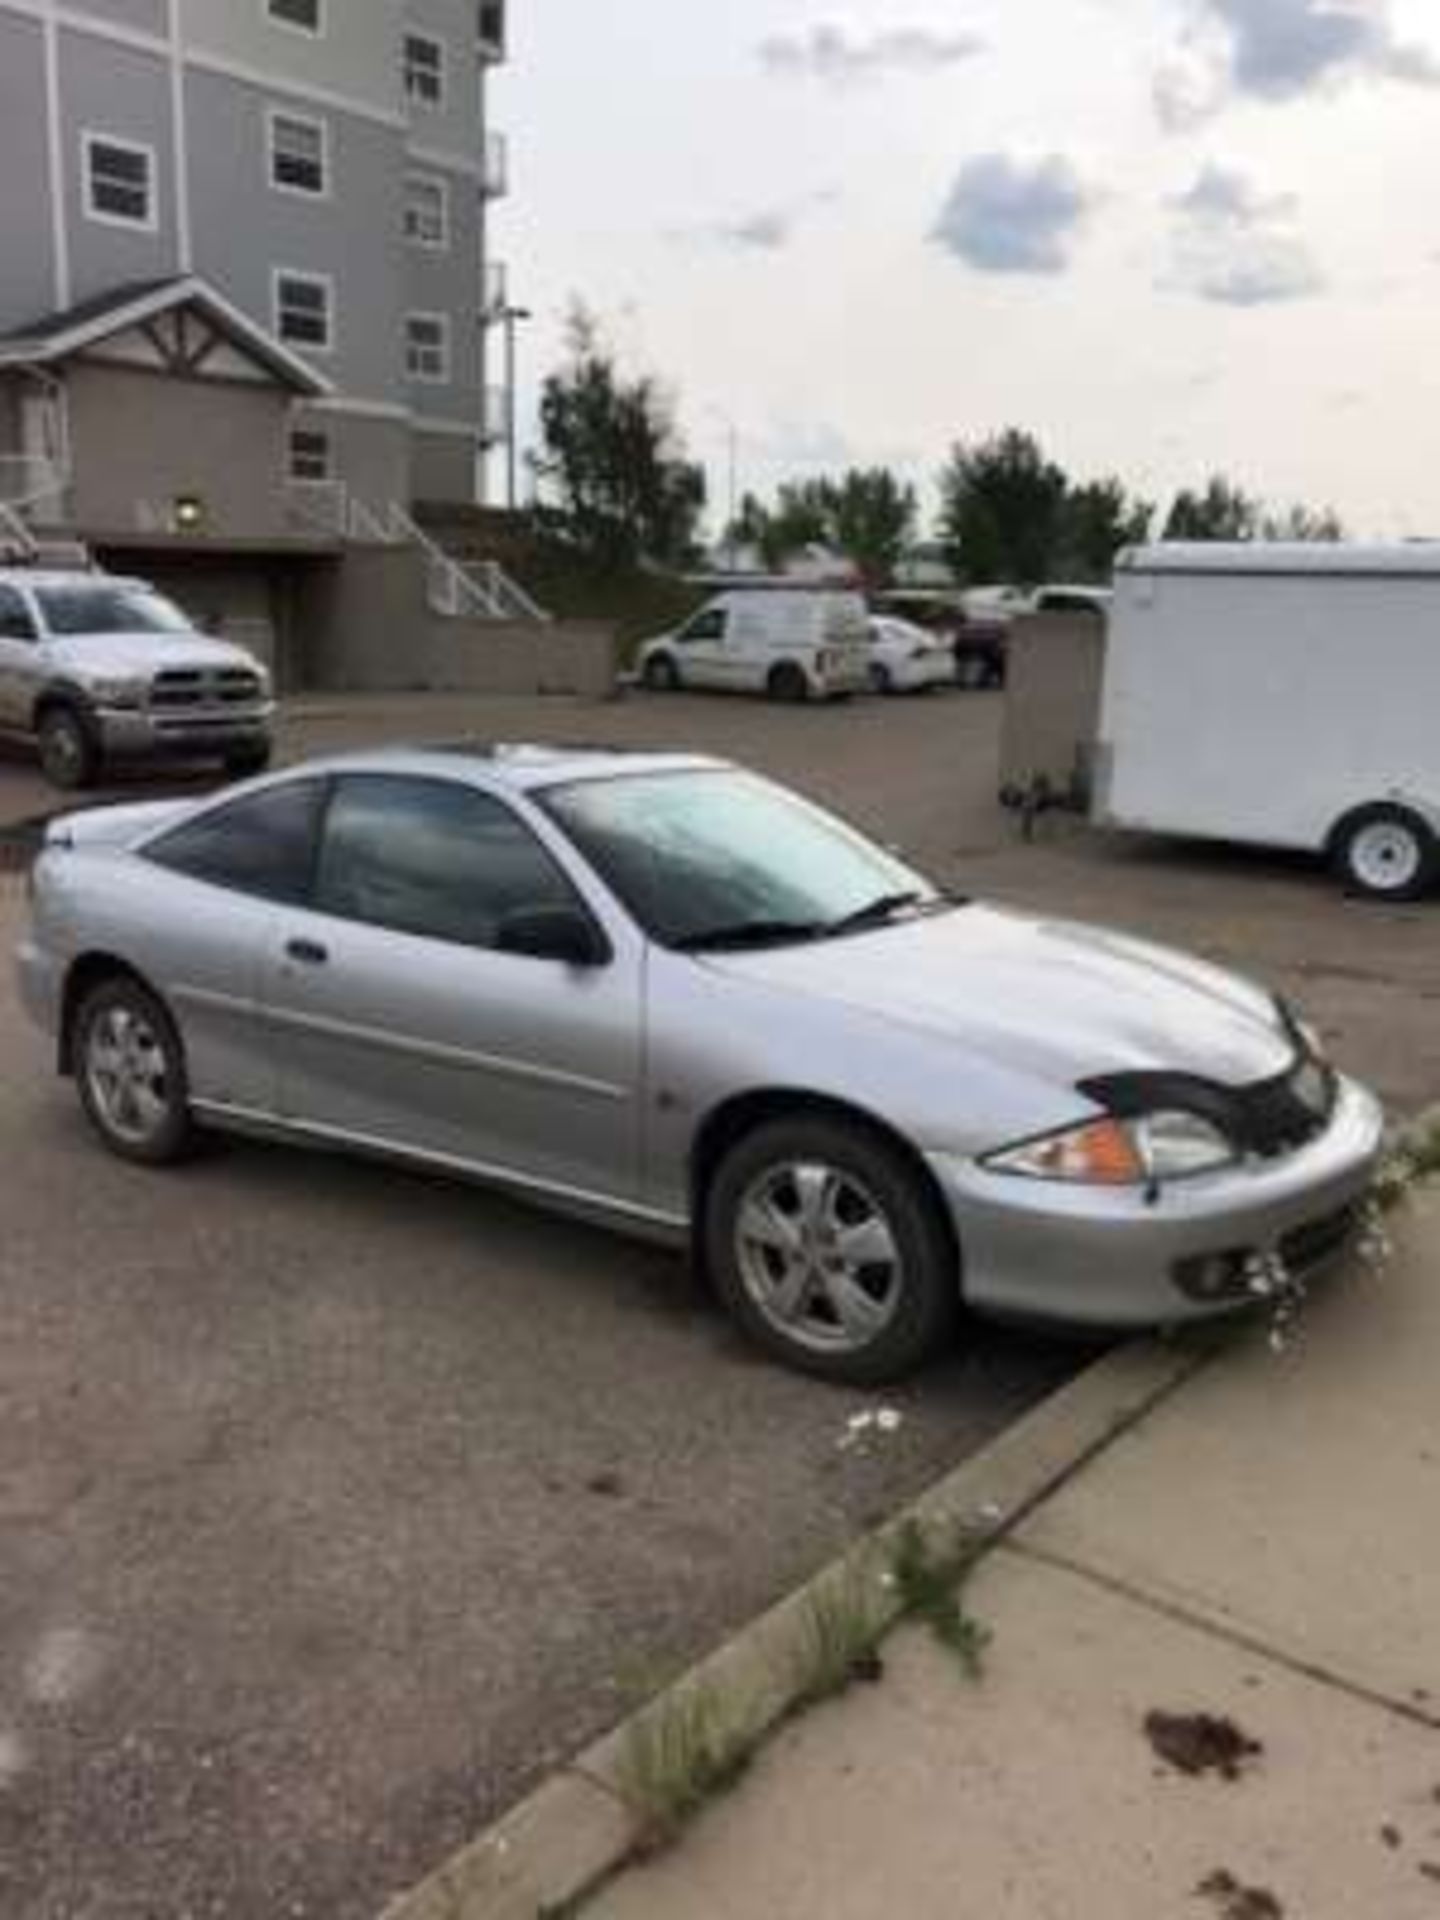 2001 Chevrolet Cavalier Z24, 2-door, 2.4L 4-cyl, manual transmission, silver paint, rust on both - Image 2 of 10